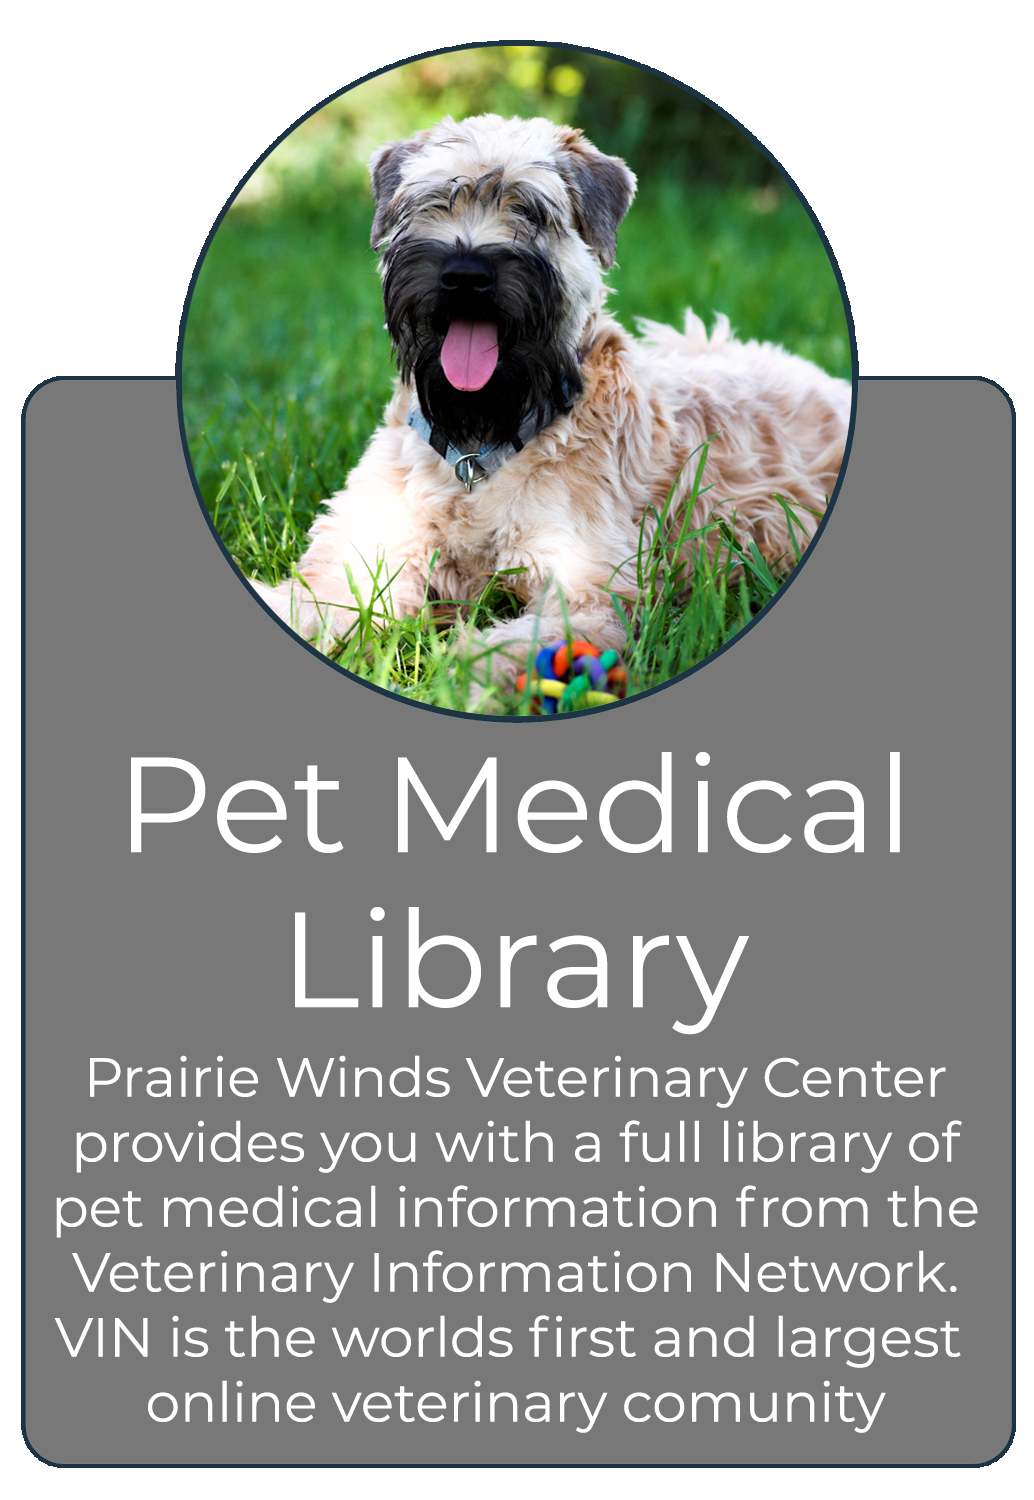 Pet Medical Library - Click to learn more about pet medical issues